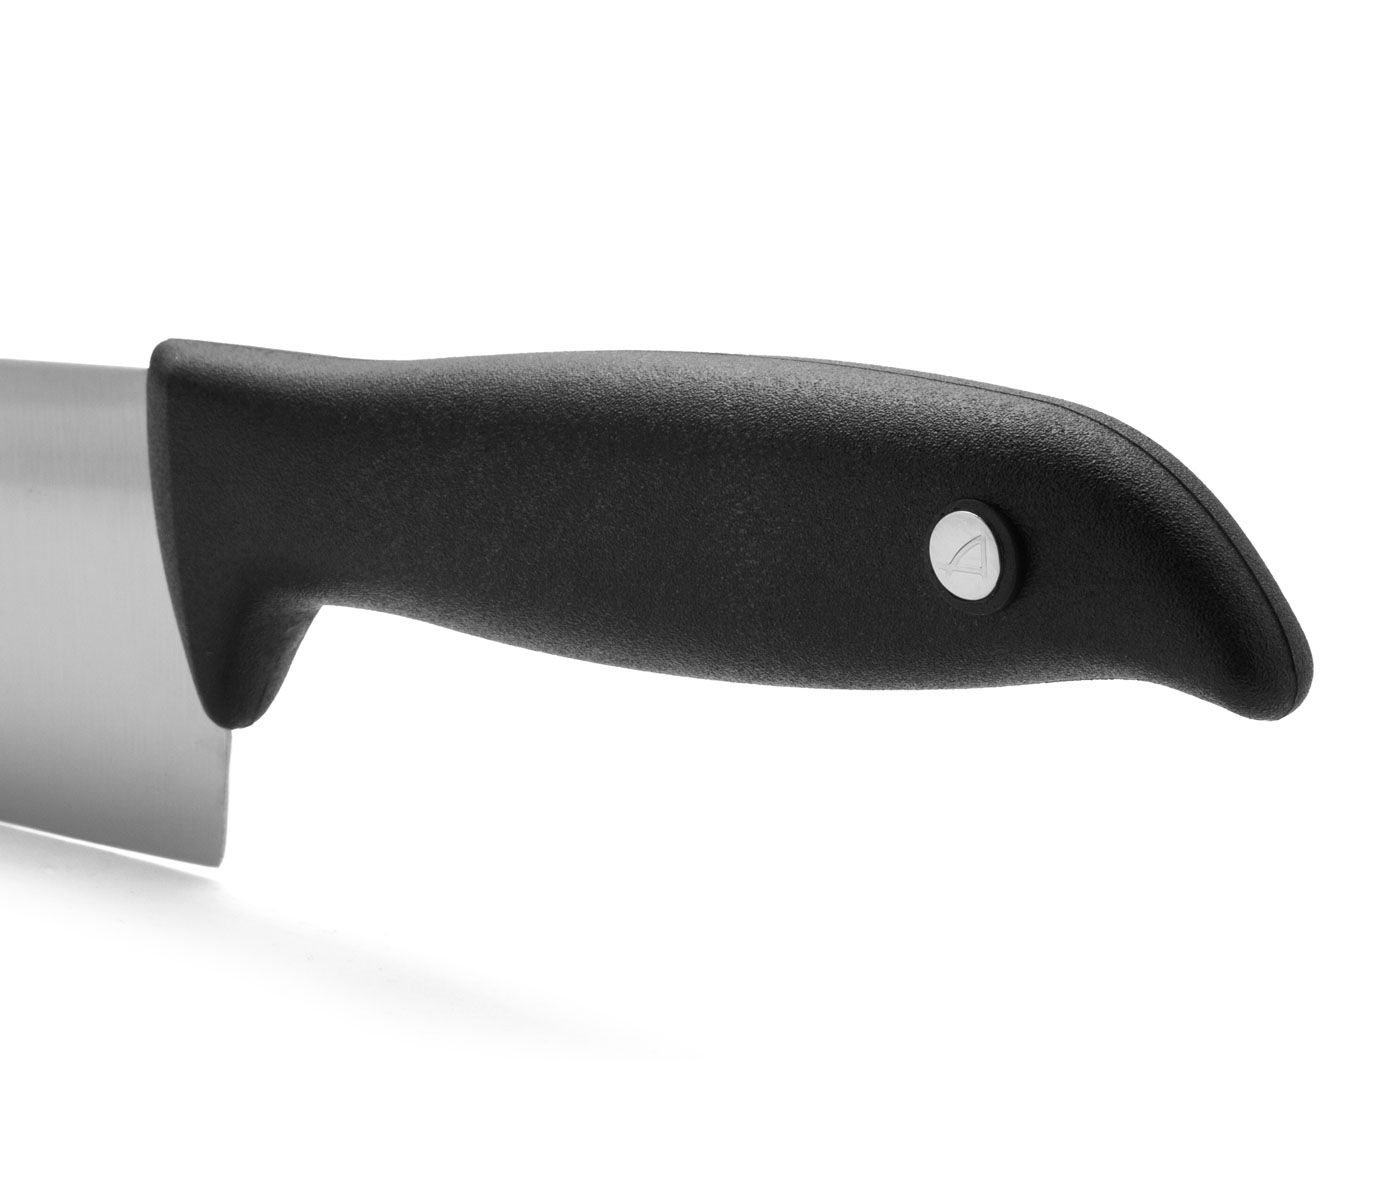 Arcos Menorca Series 8 Inch Chef's Knife - 145800